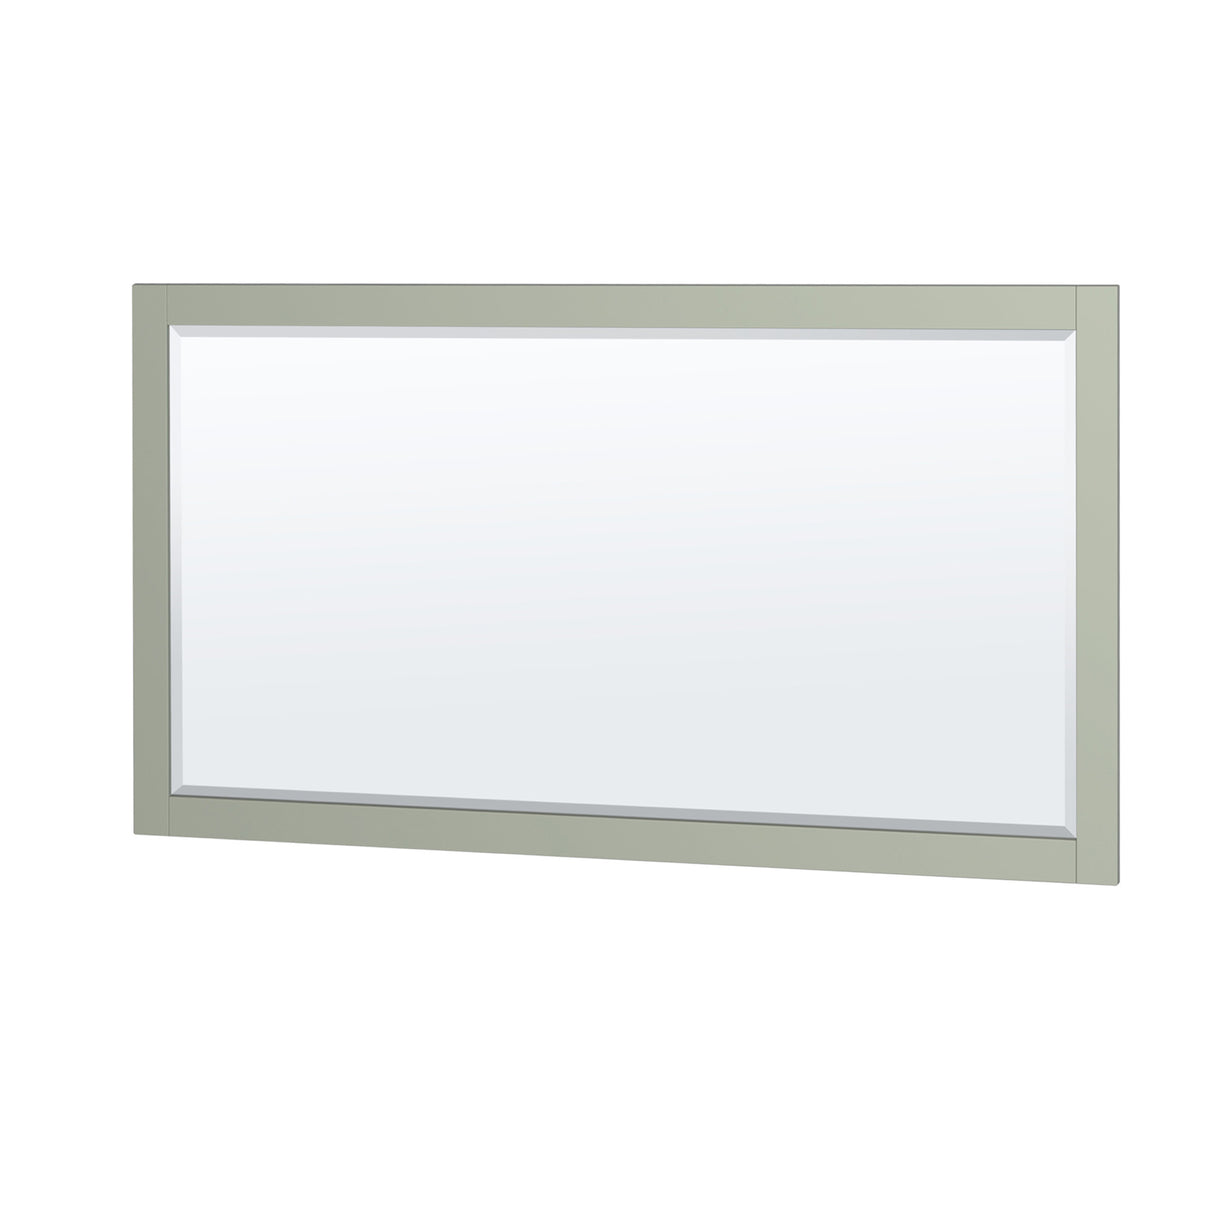 Sheffield 60 inch Double Bathroom Vanity in Light Green White Carrara Marble Countertop Undermount Square Sinks Brushed Nickel Trim 58 inch Mirror